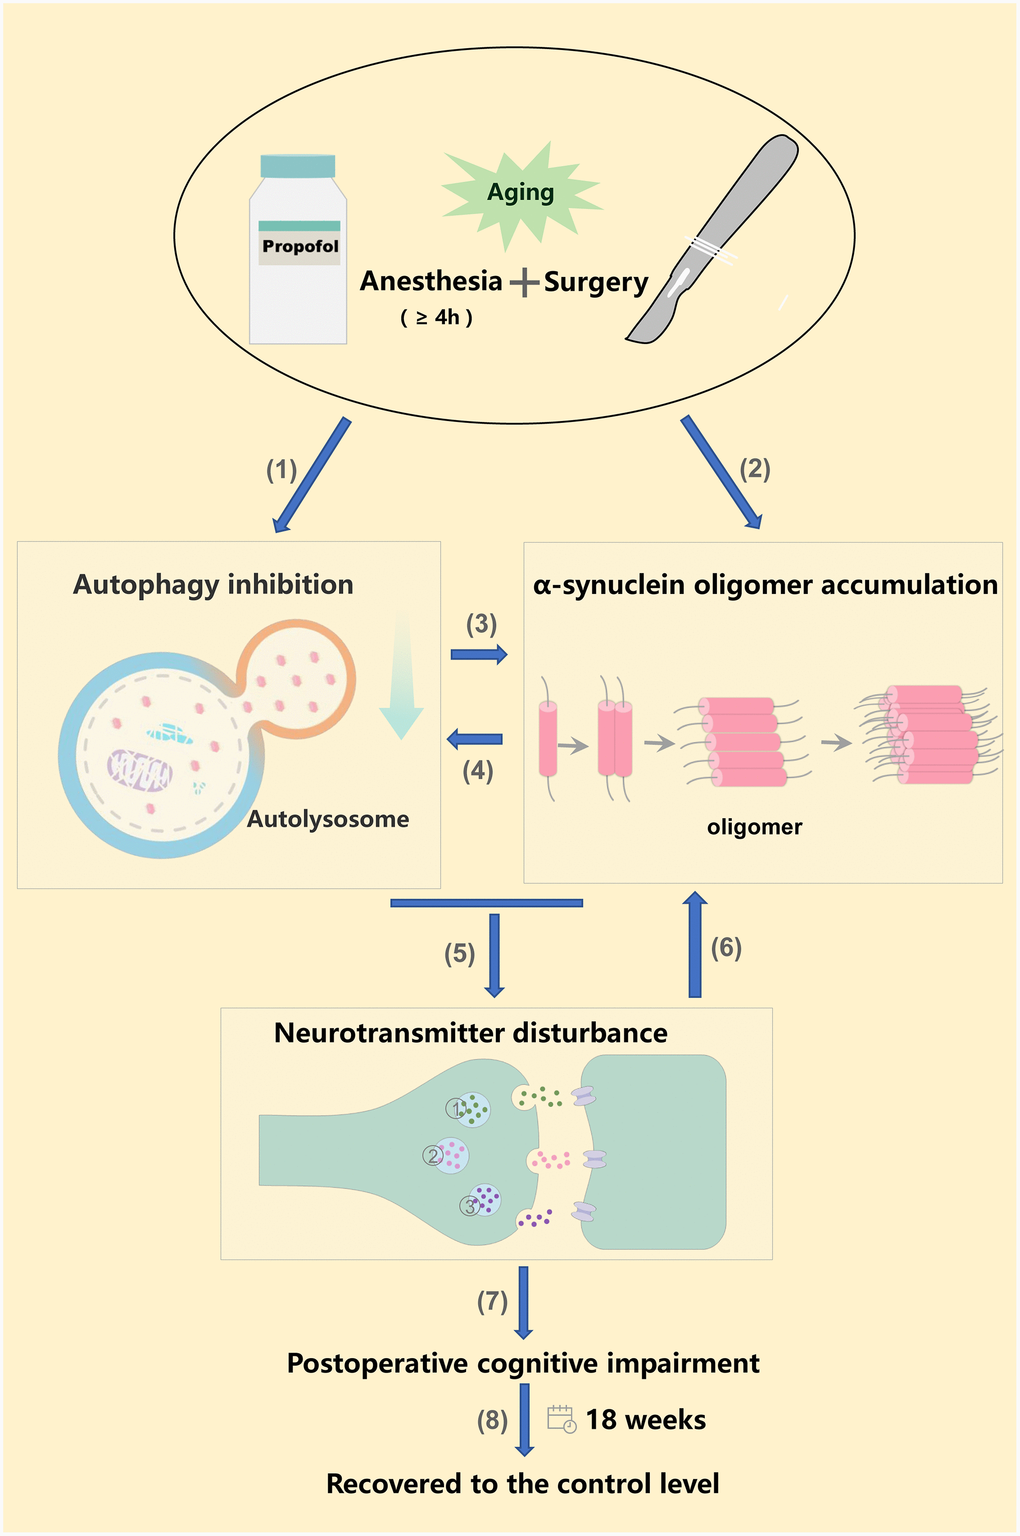 Anesthesia and surgery inhibited autophagy, increased α-synuclein oligomer levels, ultimately altering neurotransmitter levels and promoting POCD. (1) (2) Long-term propofol anesthesia (≥ 4 h) or surgery can inhibit autophagy and promote α-synuclein oligomer accumulation in the hippocampus; (3) Hippocampal autophagy inhibition further promotes α-synuclein oligomer accumulation; (4) Hippocampal α-synuclein oligomer accumulation further aggravates the inhibition of autophagy [57, 58]. (5) Hippocampal autophagy inhibition and α-synuclein oligomer accumulation alter neurotransmitter levels, ultimately promoting POCD (7); (6) Neurotransmitter imbalances may further exacerbate α-synuclein oligomer aggregation [46]. (8) Neurobehavior, autophagy-related protein levels and α-synuclein oligomer levels returned to the control levels 18 weeks post-surgery or post-anesthesia. ① Norepinephrine; ② Dopamine; ③ 5-hydroxytryptamine.